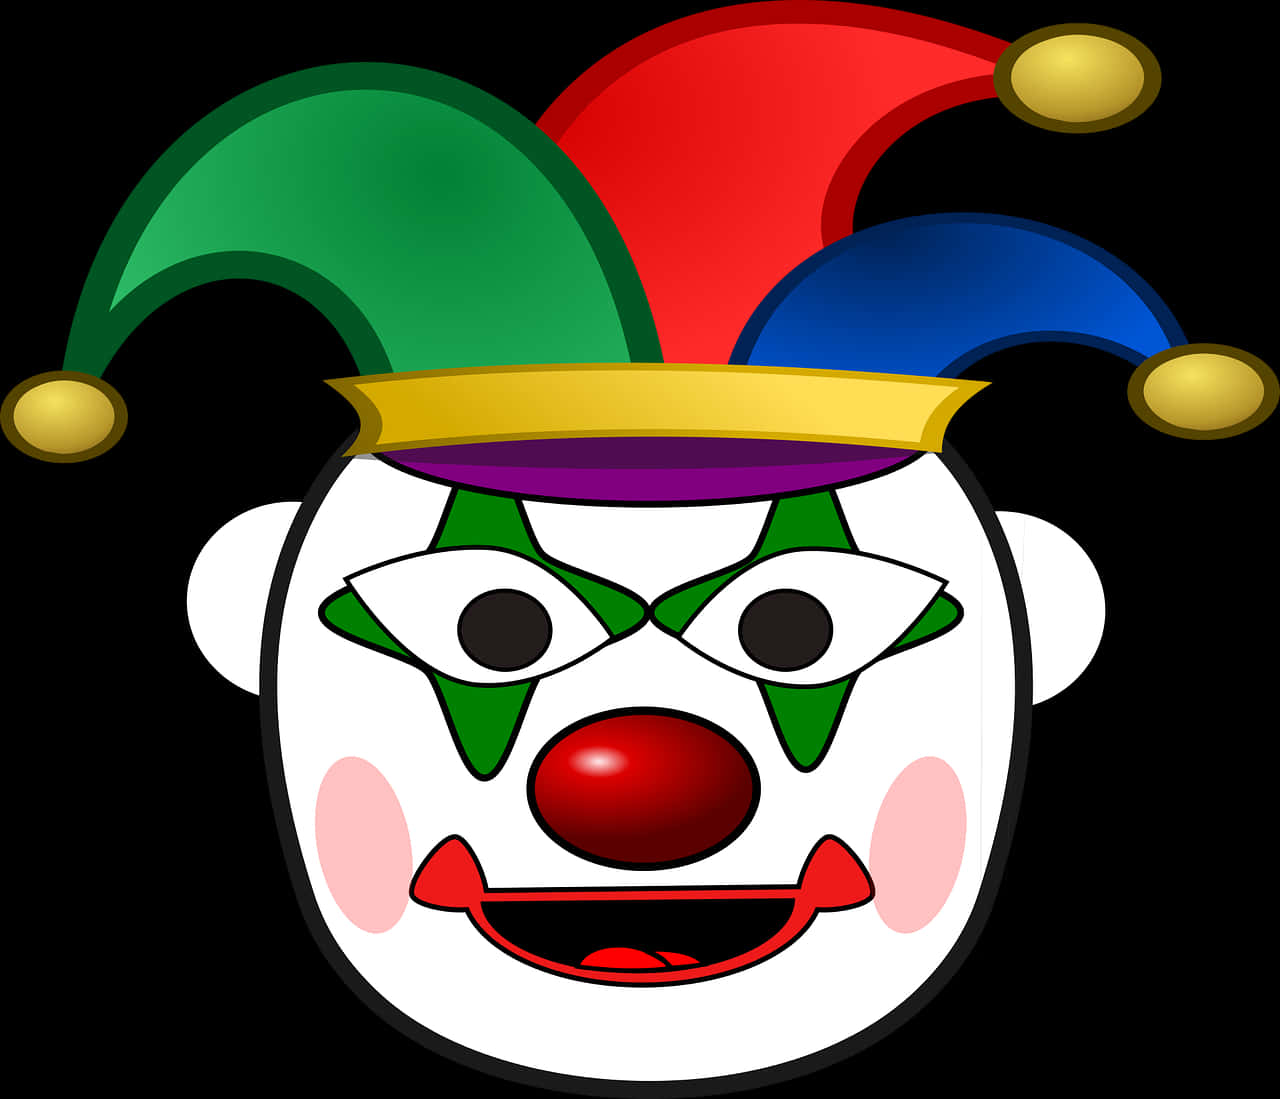 A Clown Face With Colorful Hat